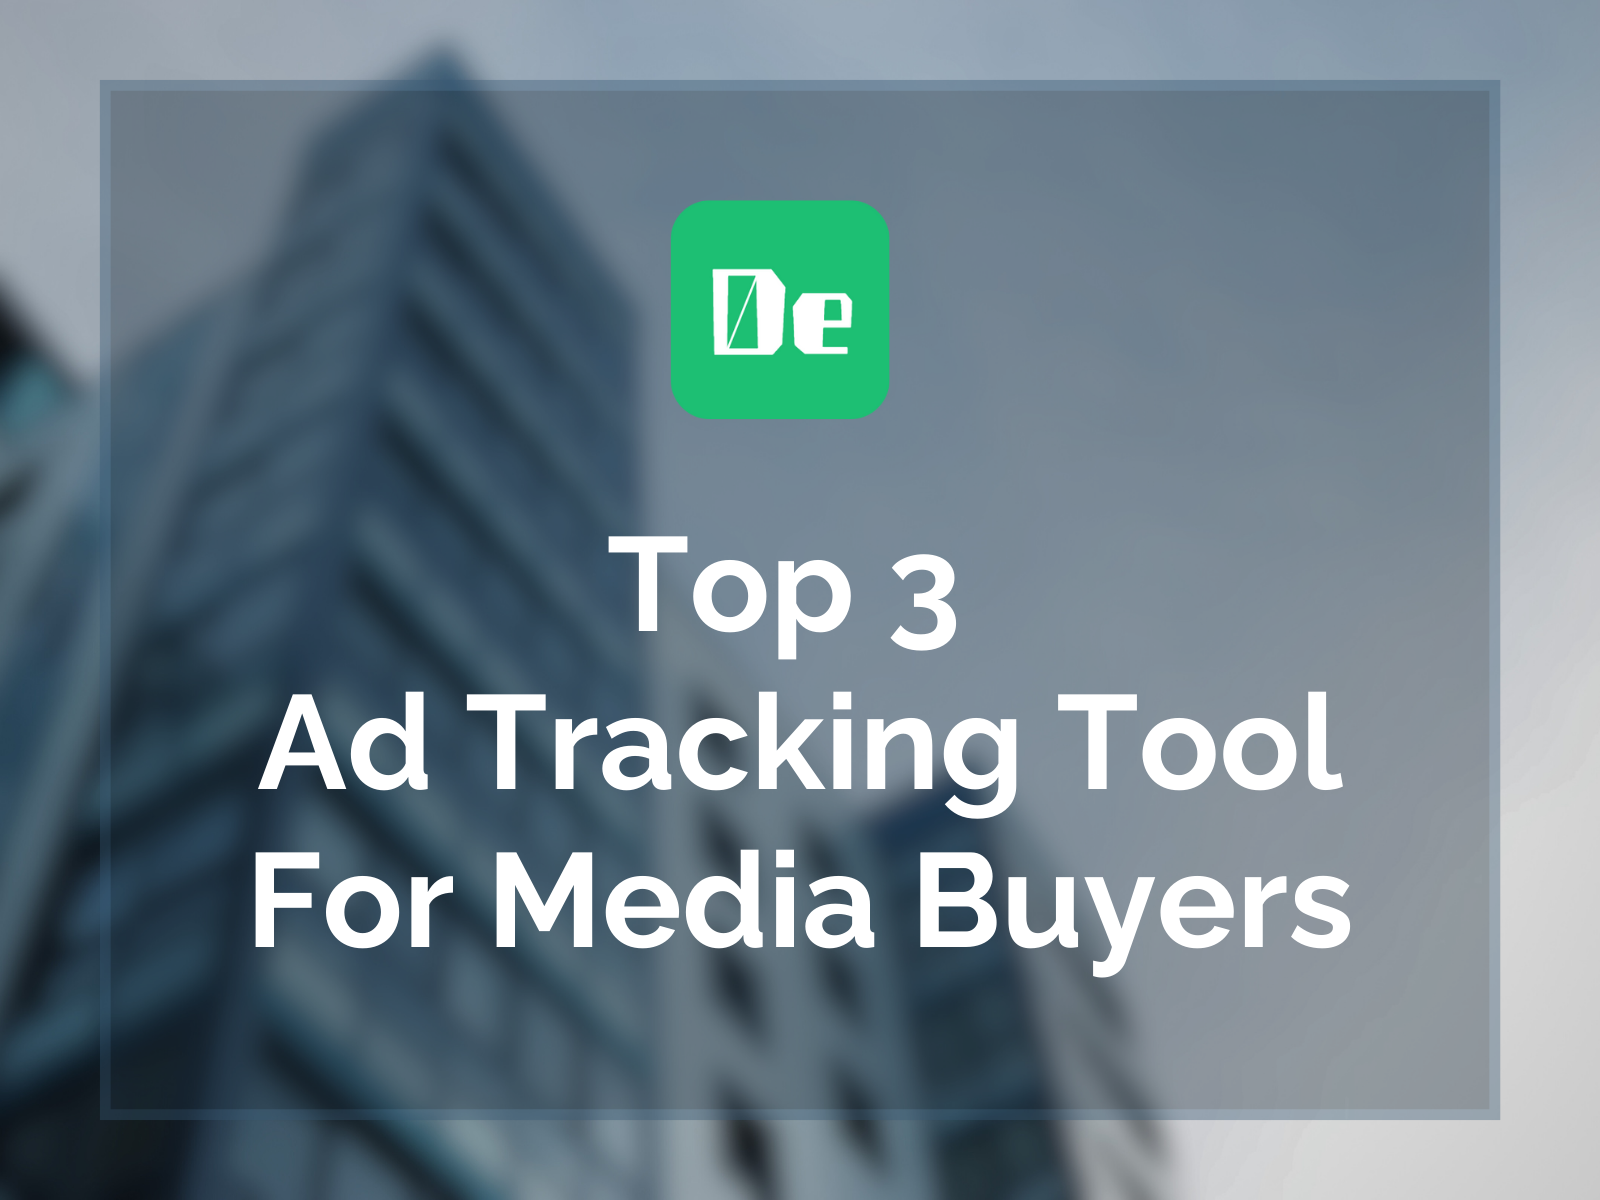 denote, ad tracking, media buyers